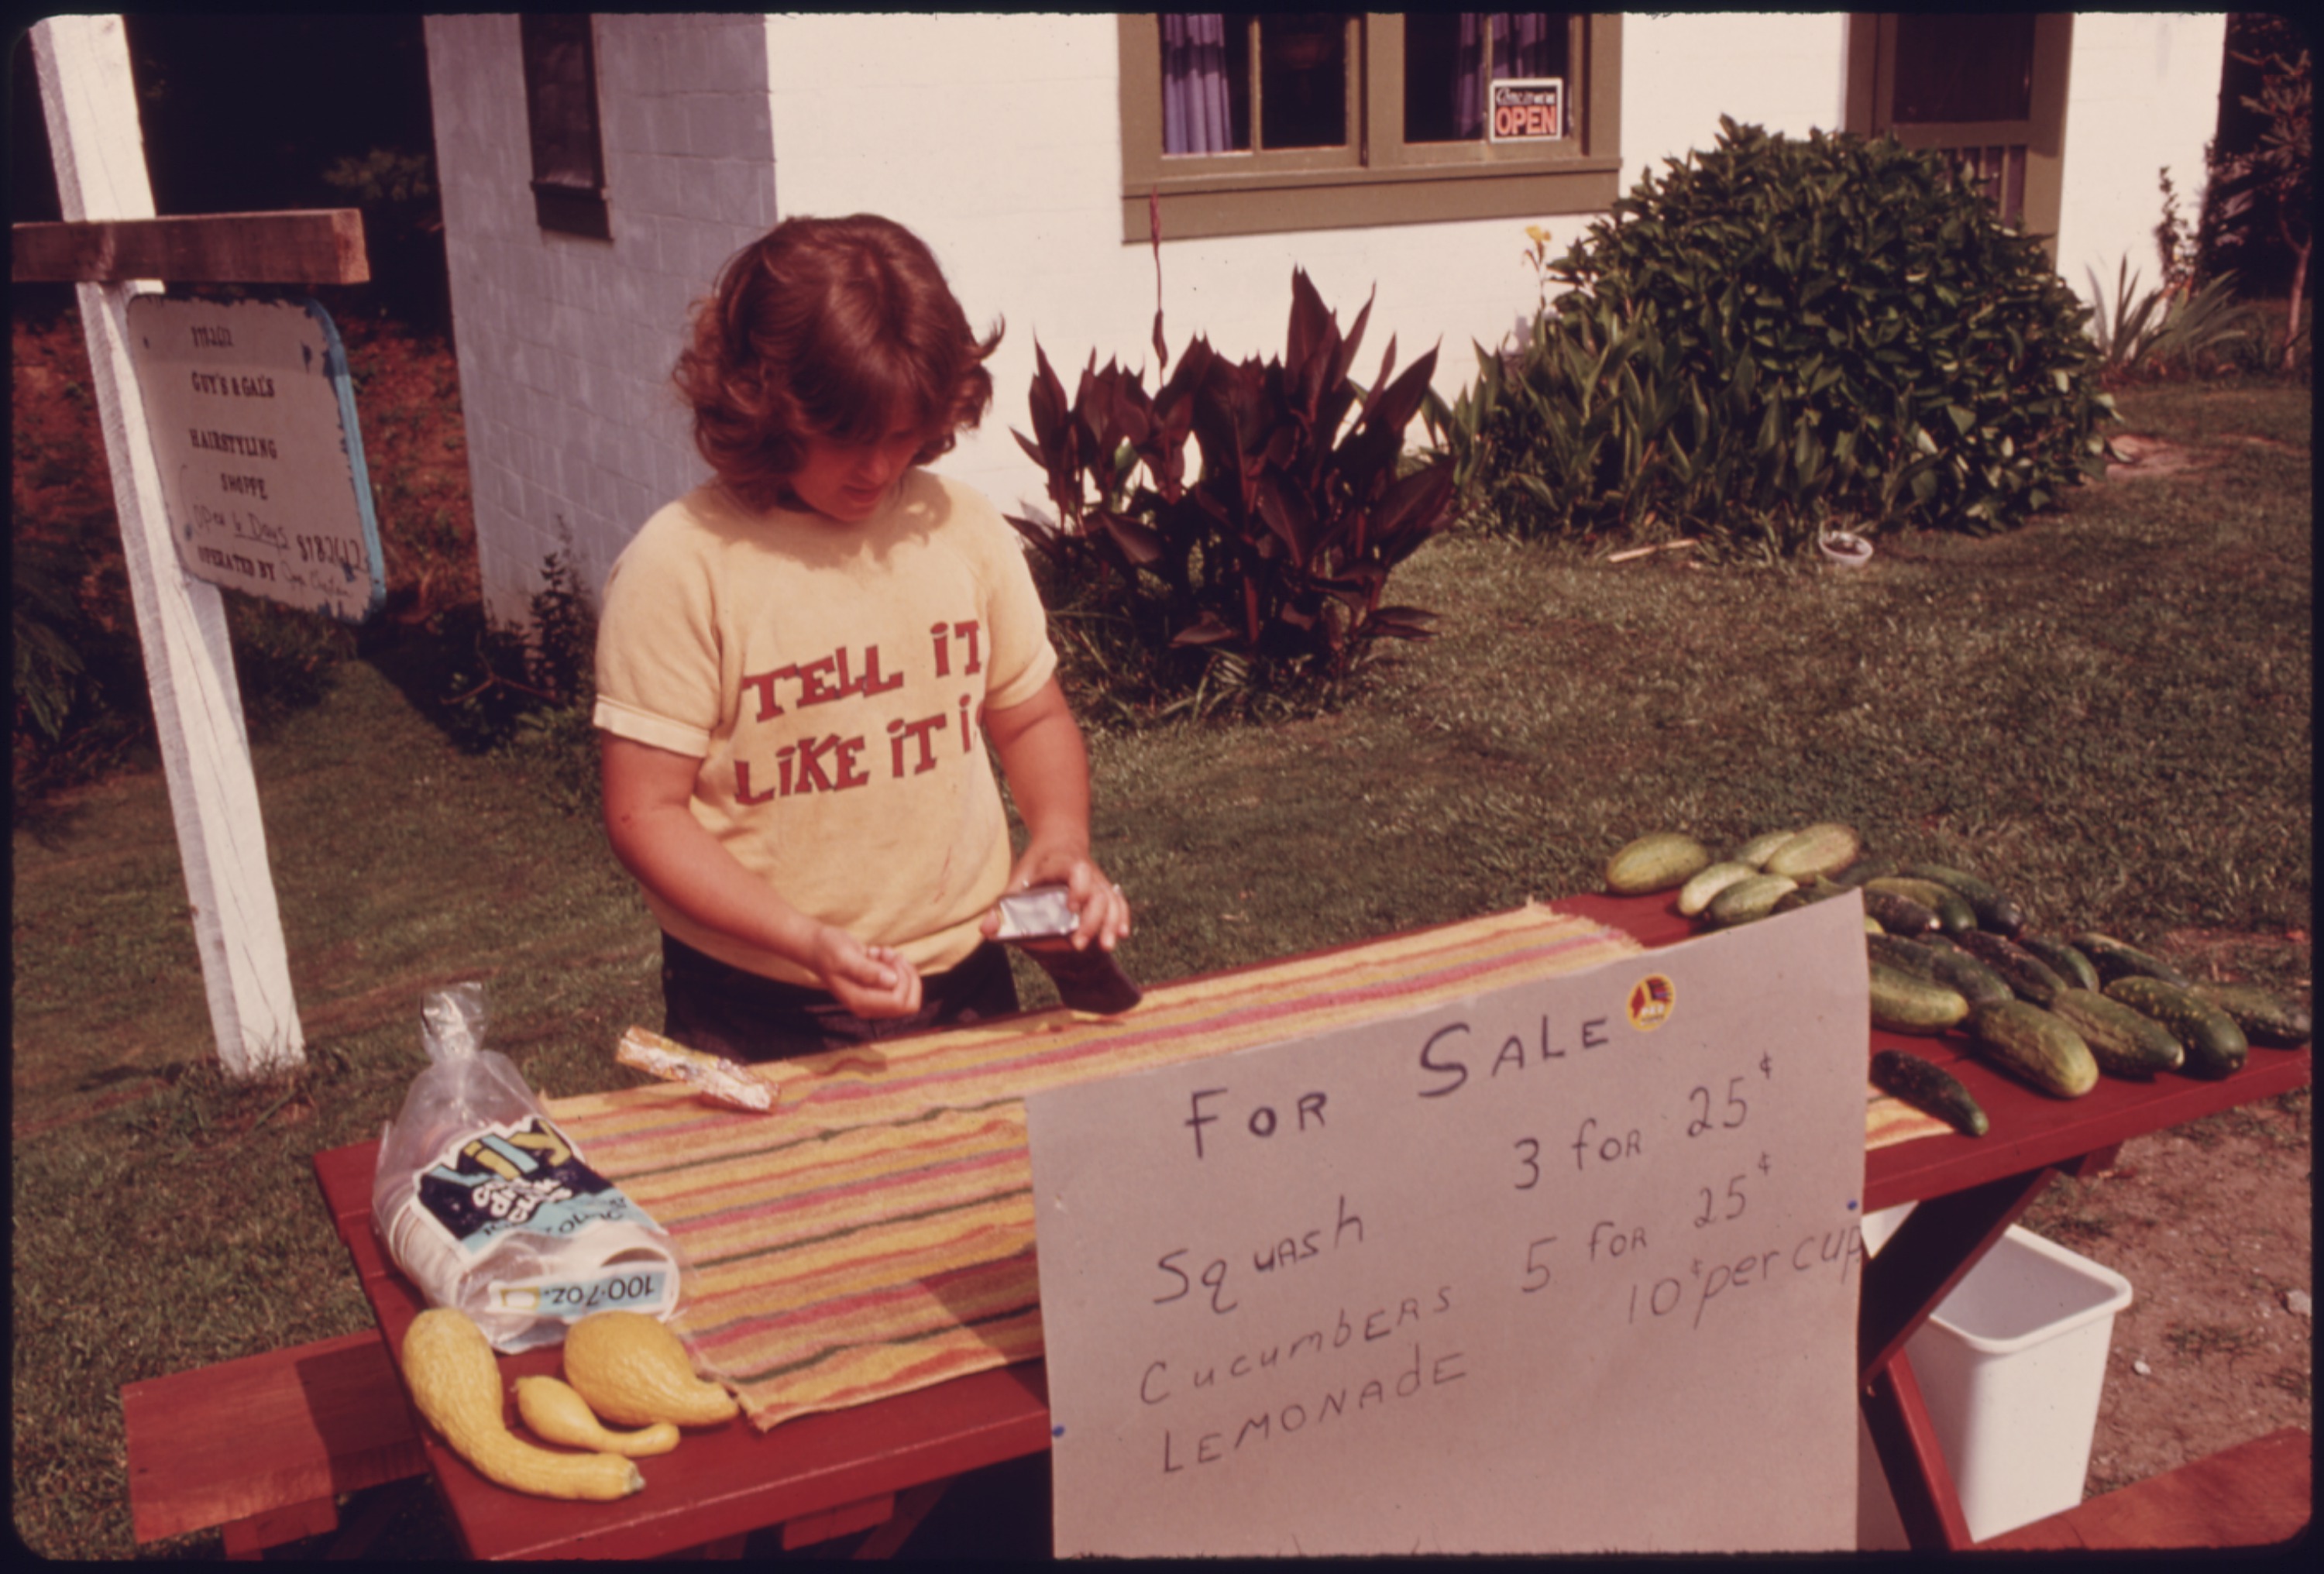 YOUNGSTER_MANS_A_ROADSIDE_STAND_SELLING_SQUASH,_CUCUMBERS_AND_LEMONADE_ON_SIMS_ROAD_AND_GEORGIA_HIGHWAY_356_AT..._-_NARA_-_557757